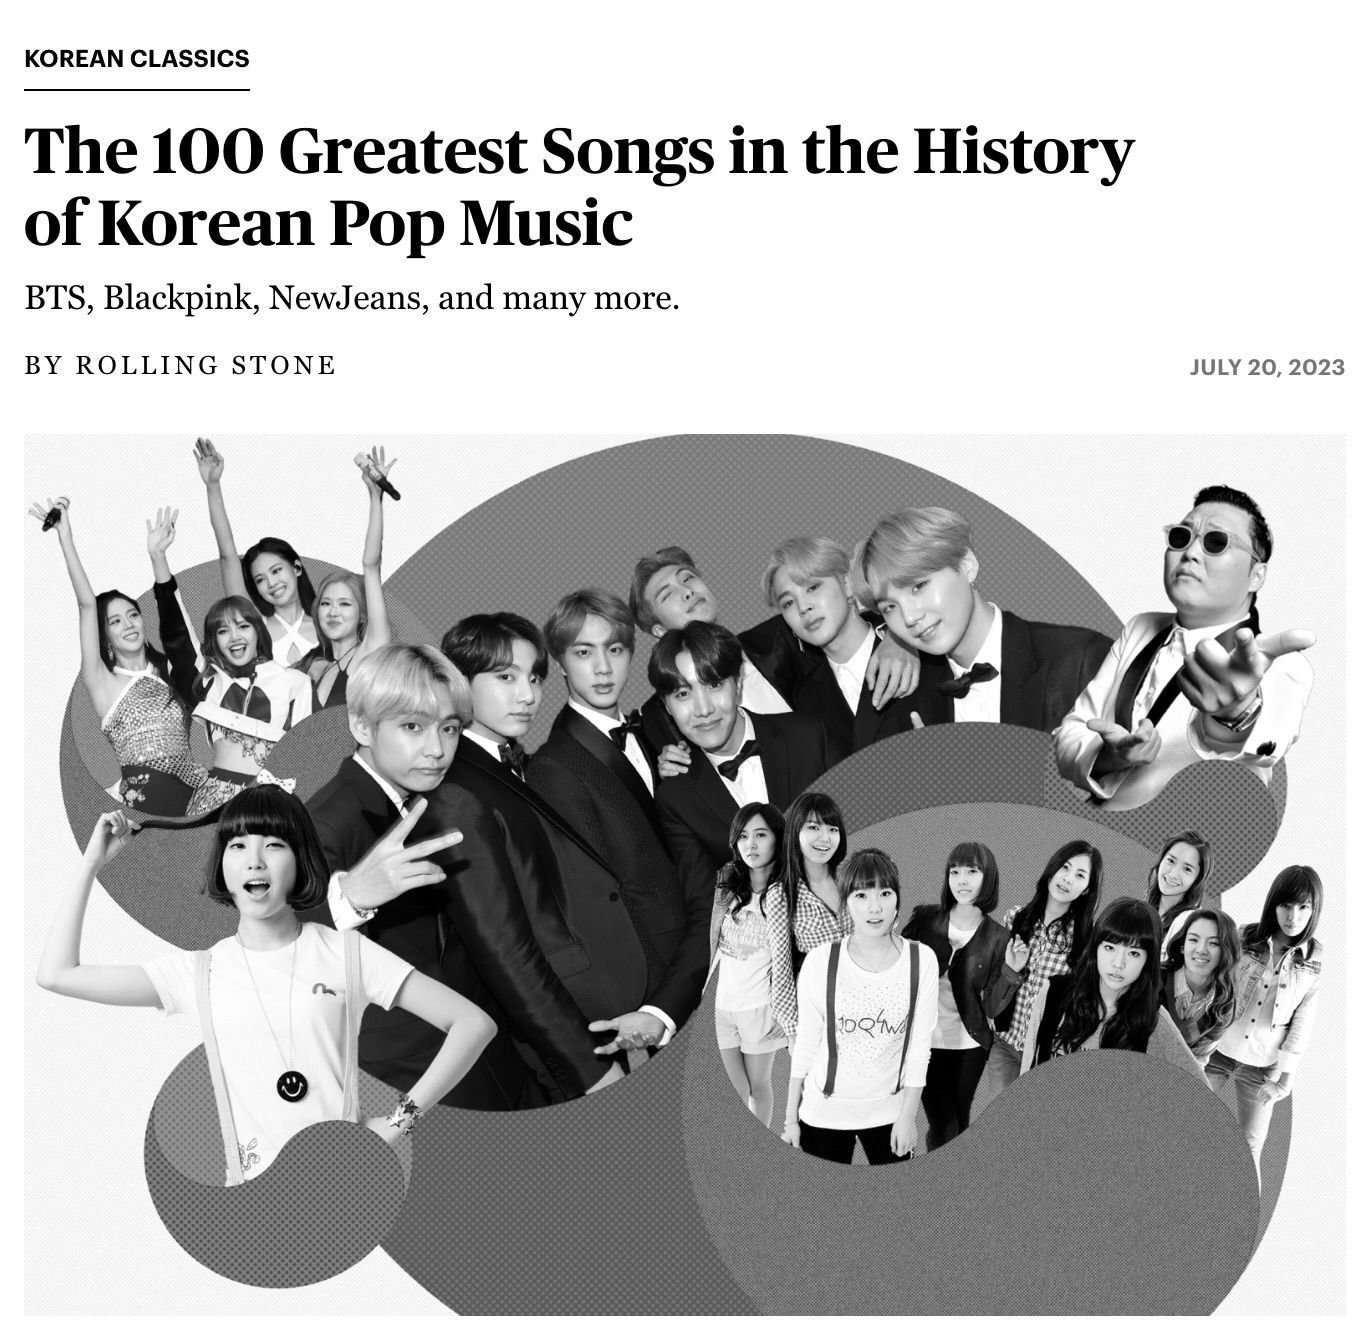 The Irresponsibility of Rolling Stone’s “The 100 Greatest Songs in the History of Korean Pop Music”